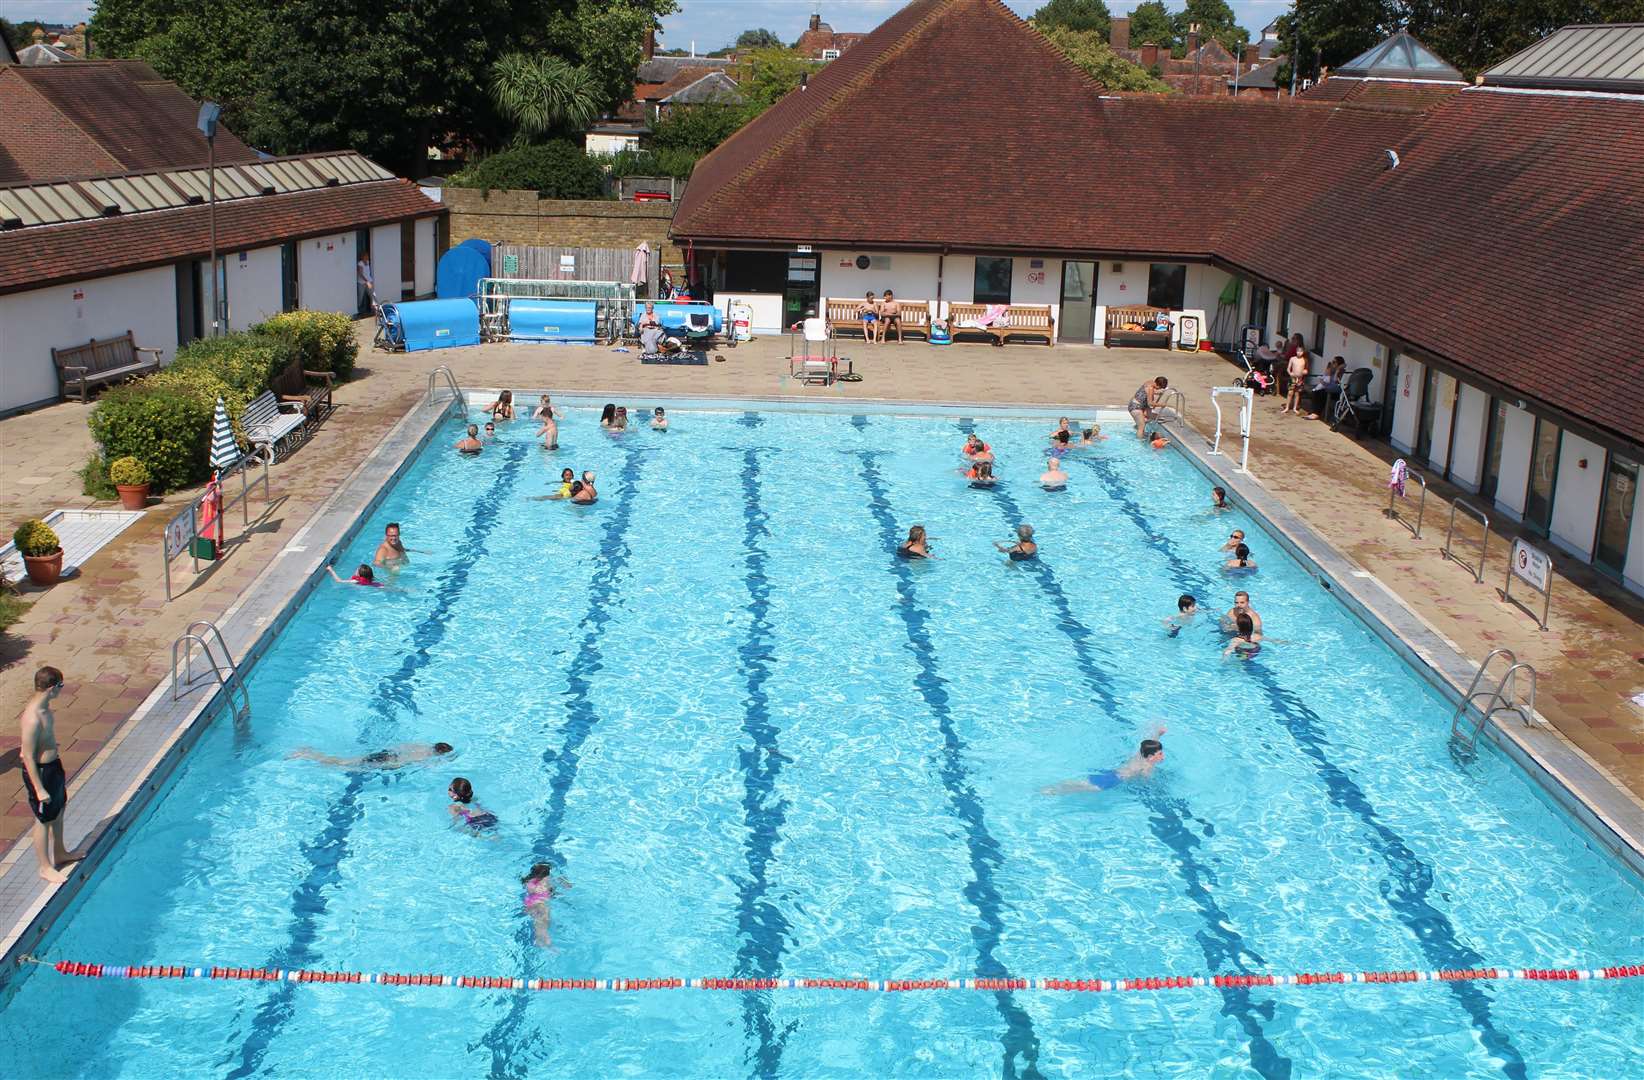 View of the outdoor pools from the top diving board. Picture: Poppy Boorman/Faversham Pools